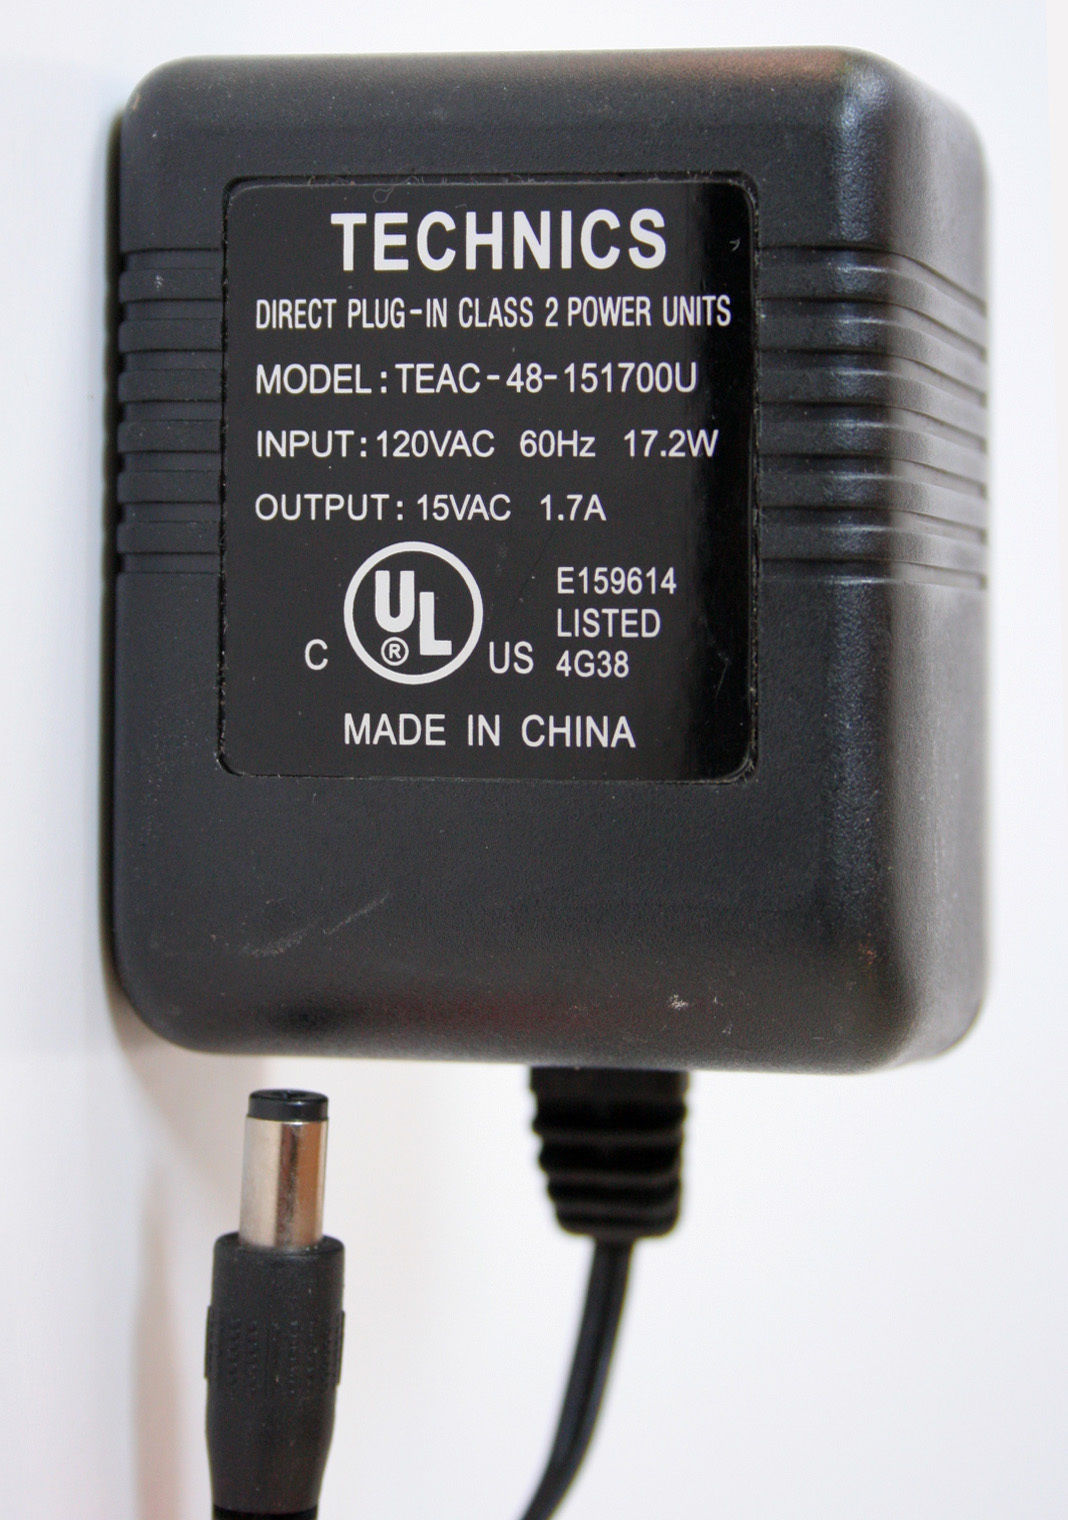 NEW Genuine TECHNICS Power Supply Adapter TEAC-48-151700U 15VAC 1.7A charger